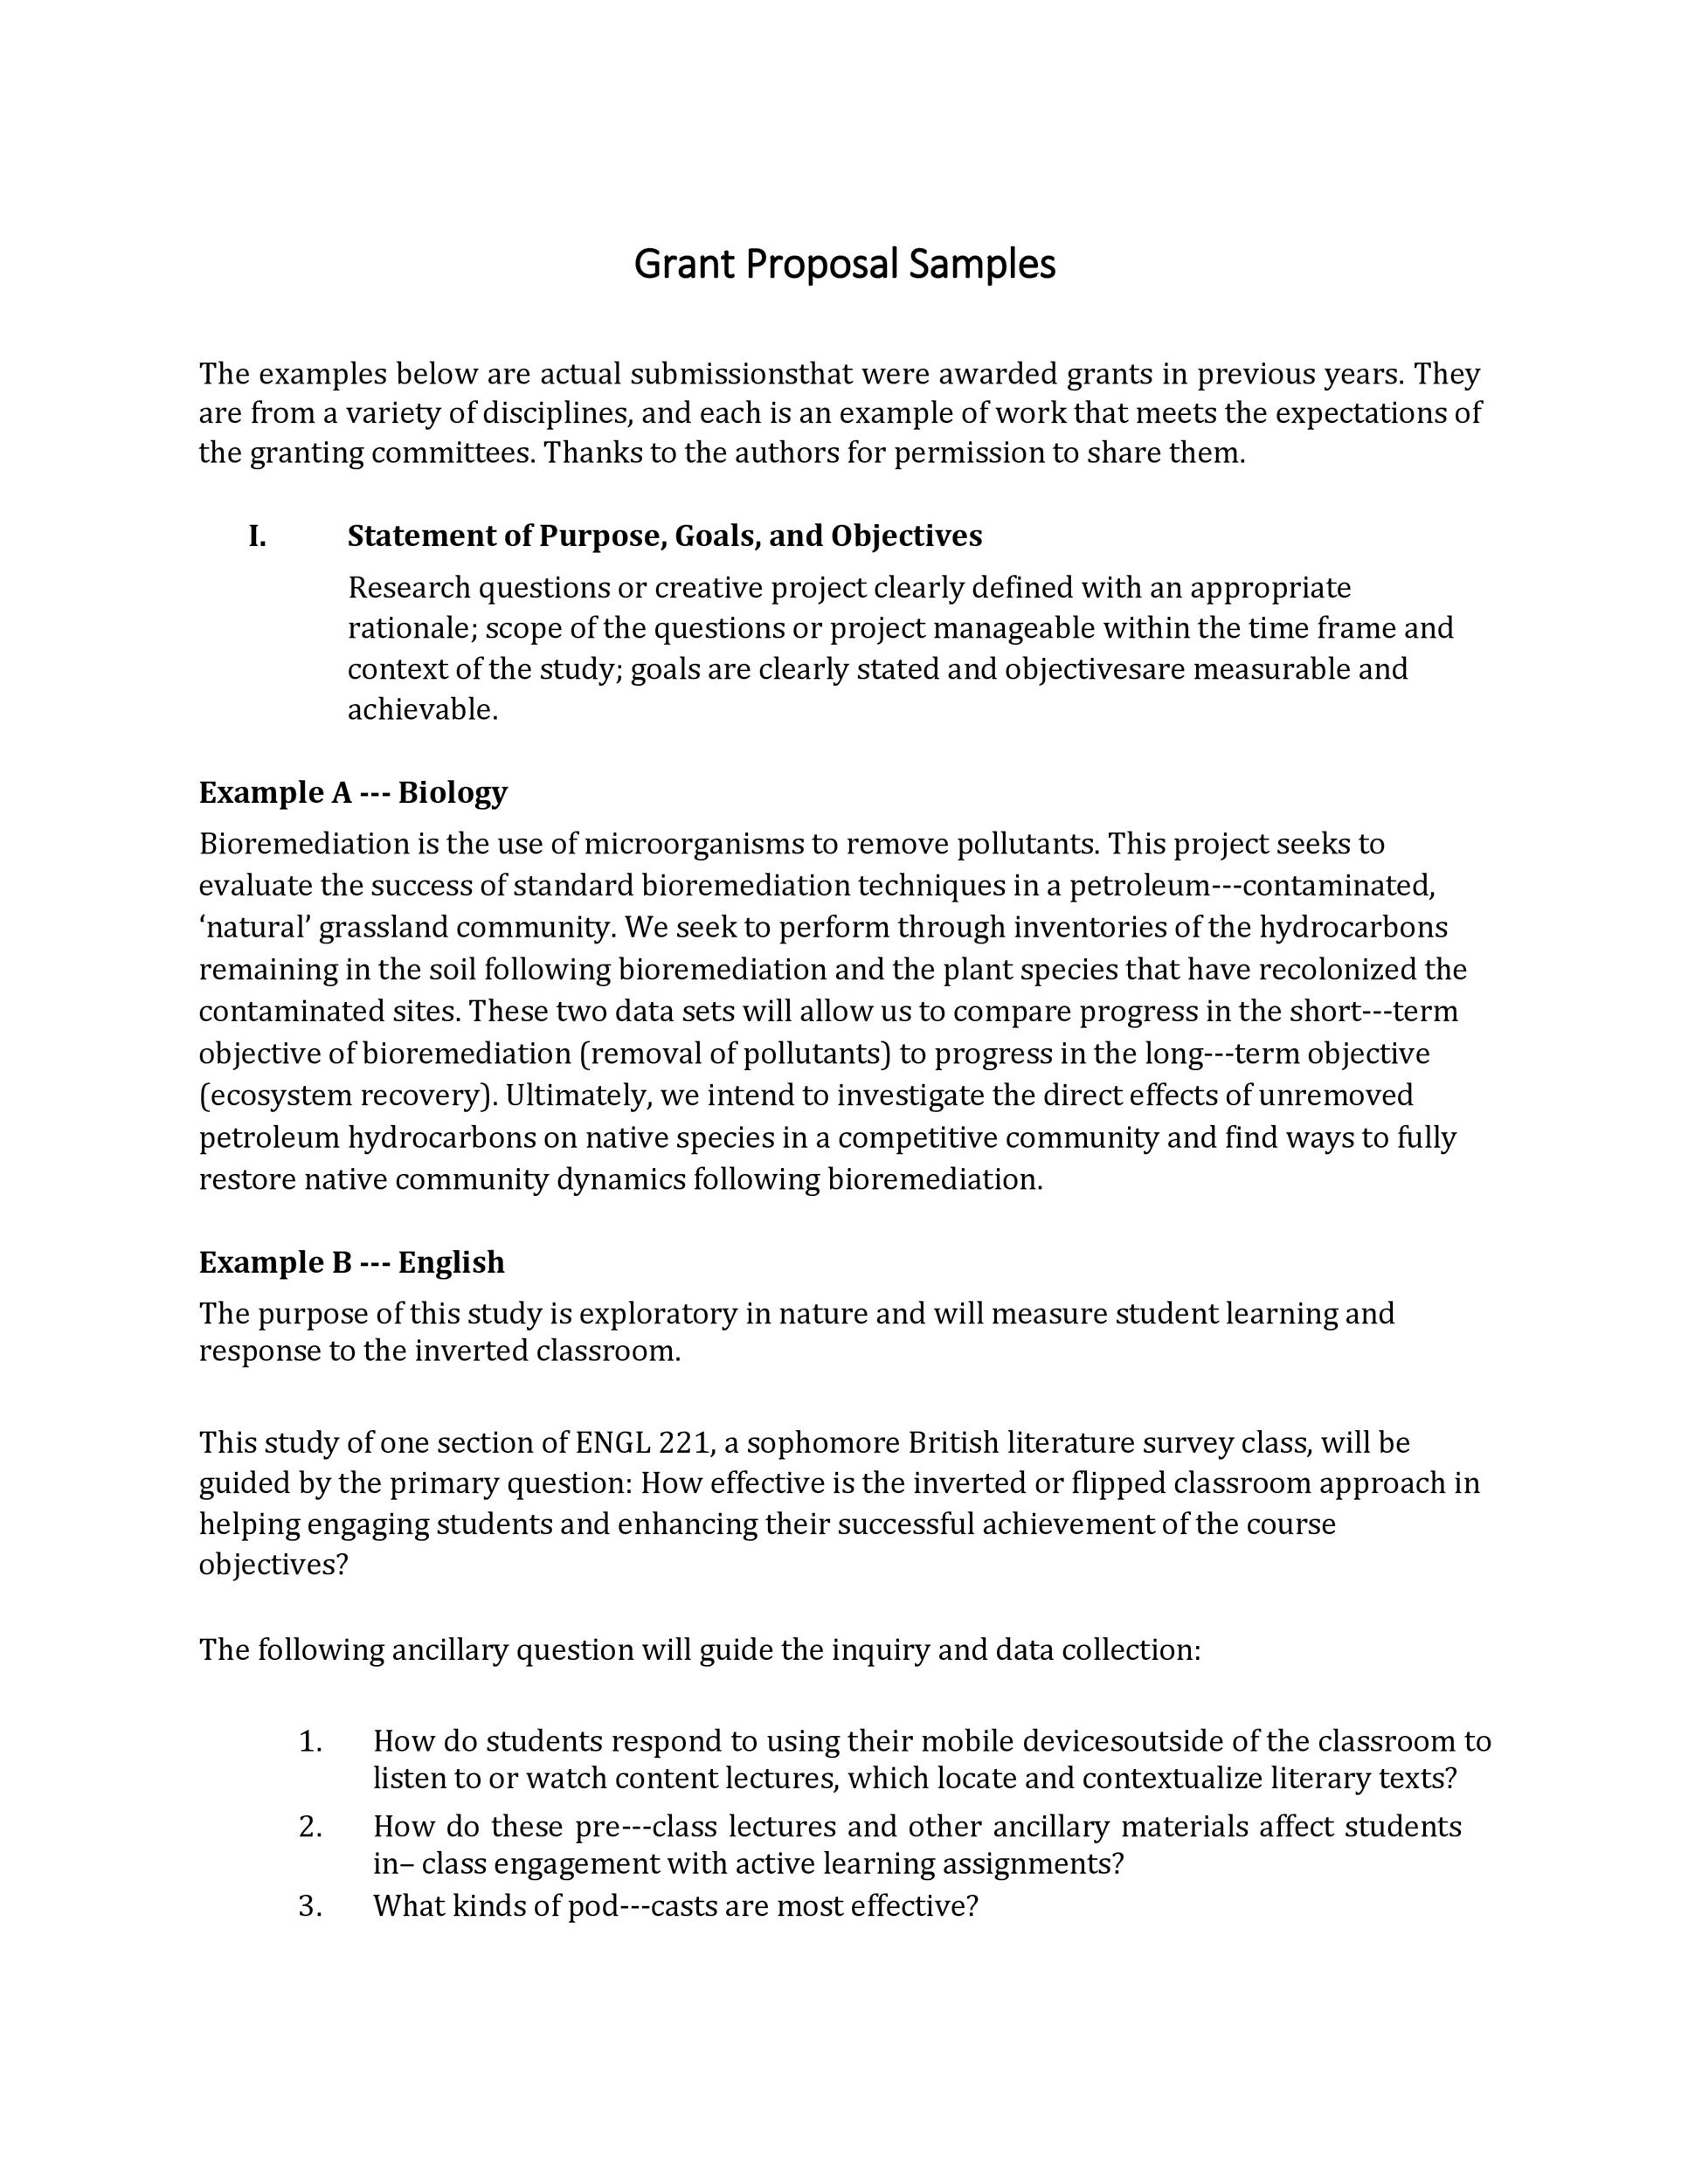 Grant Proposal Writing Help! Professional Grant Writer